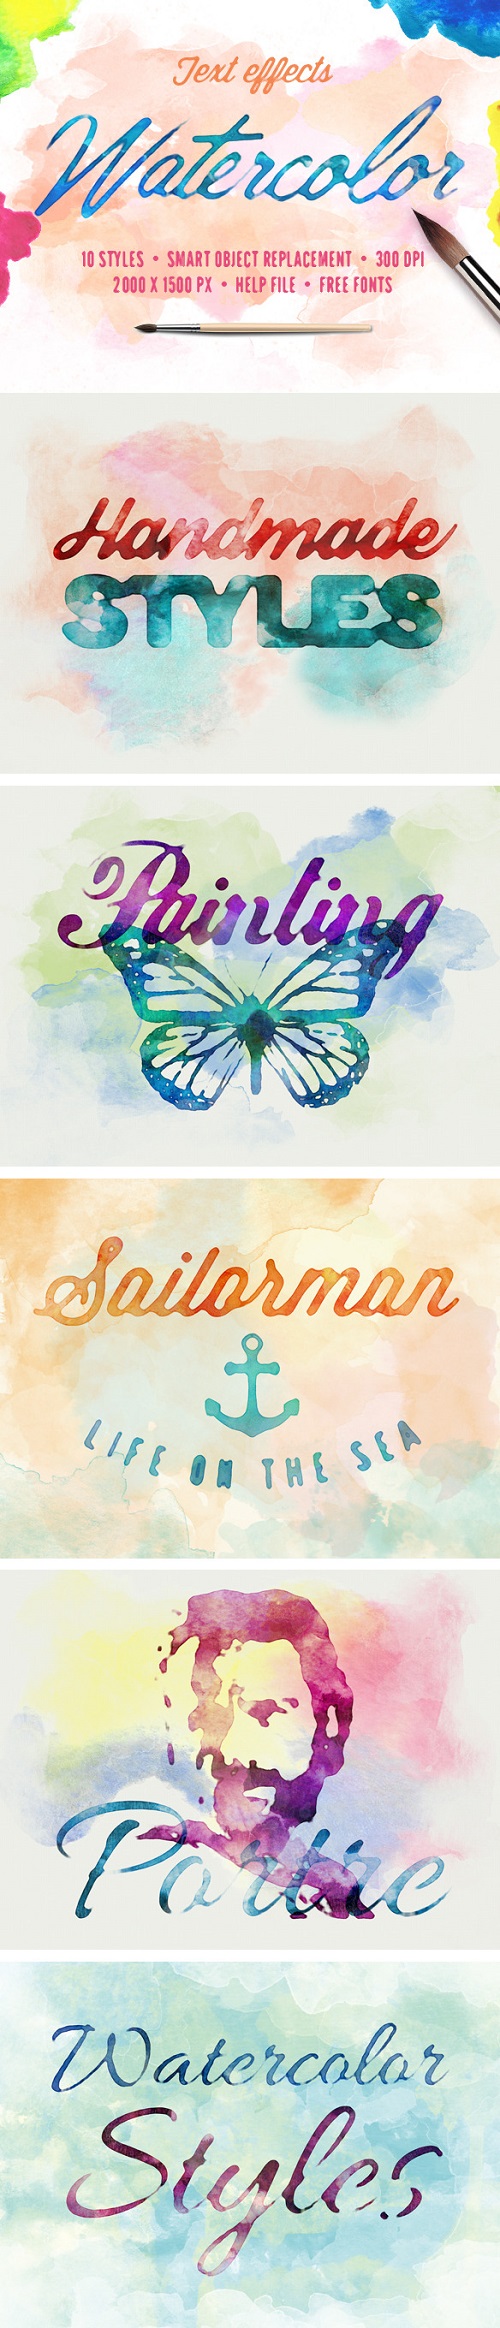 Watercolor Text Effects 11199799